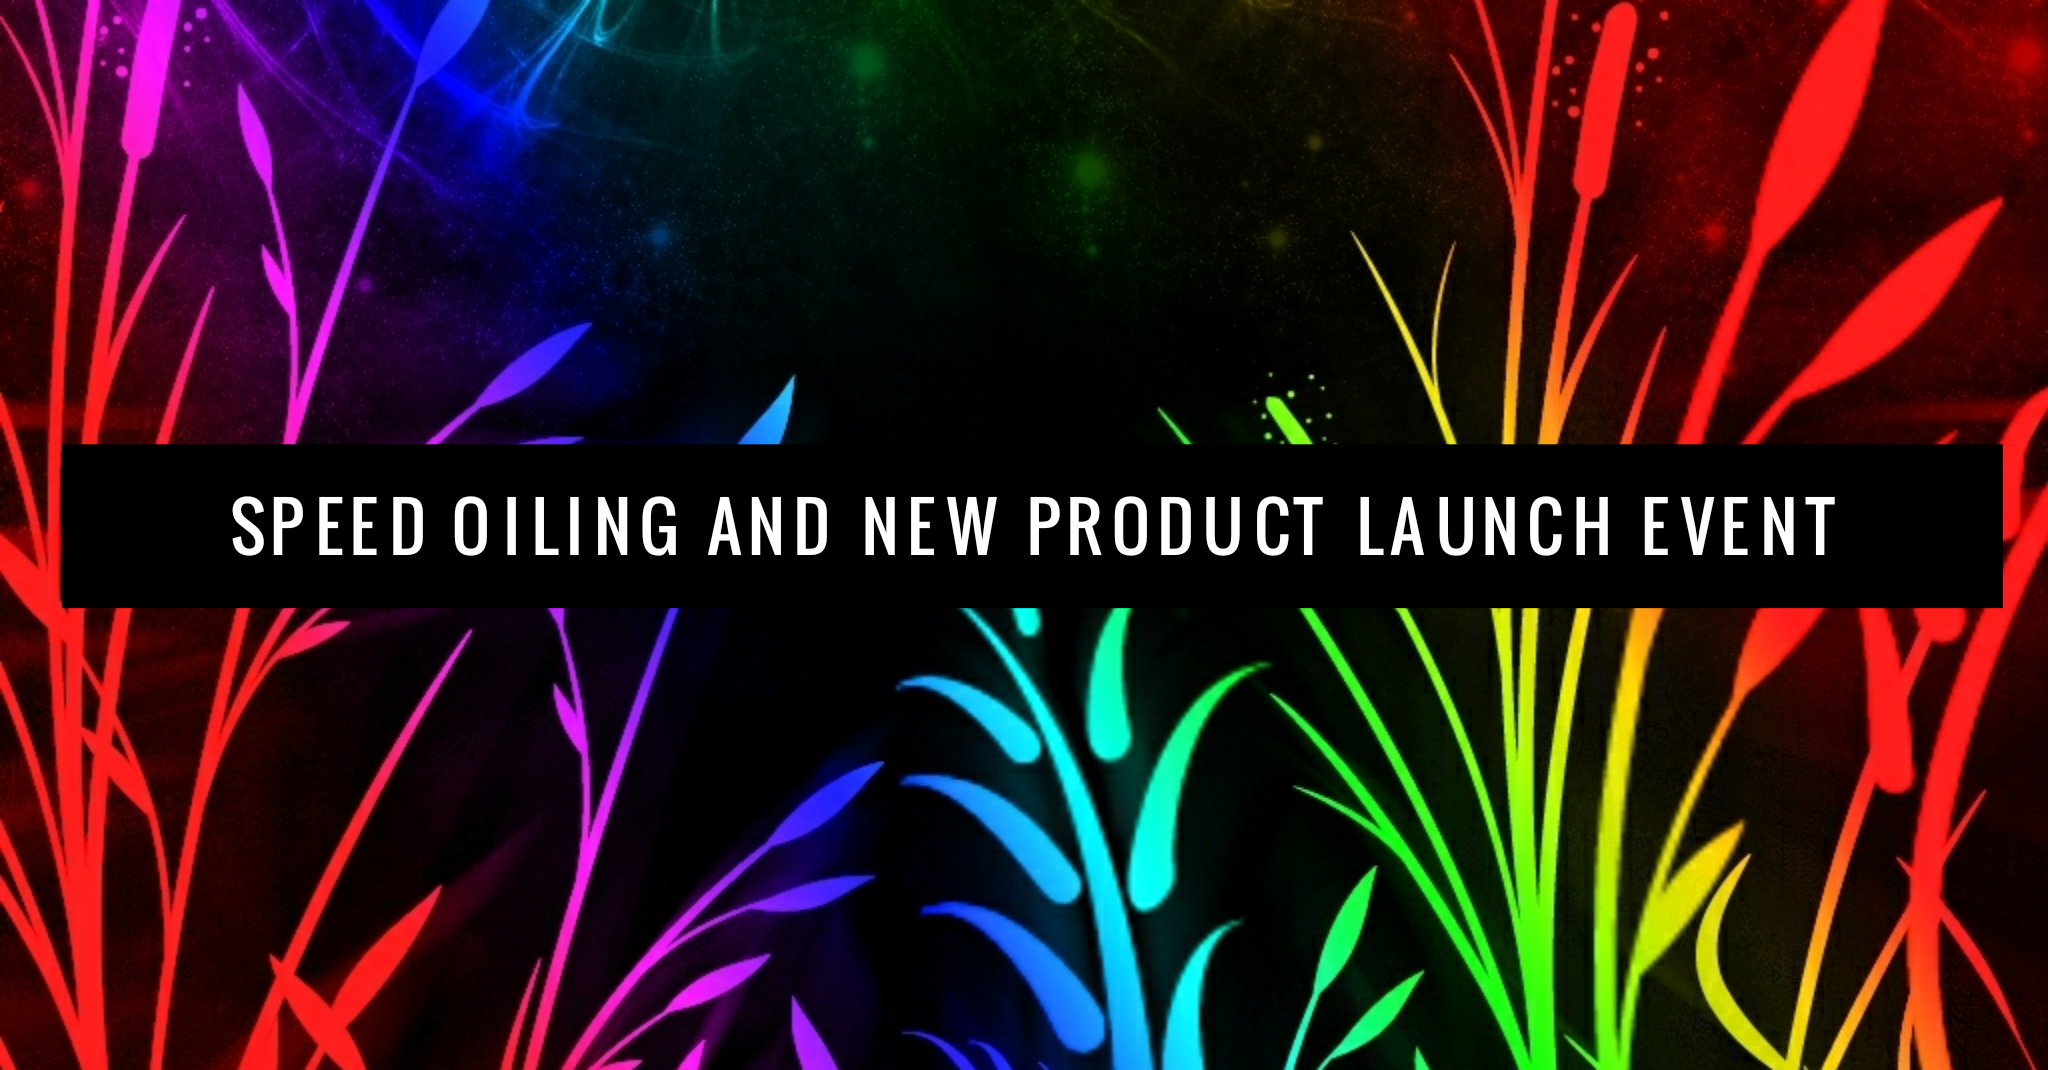 Speed Oiling and New Product Launch Event